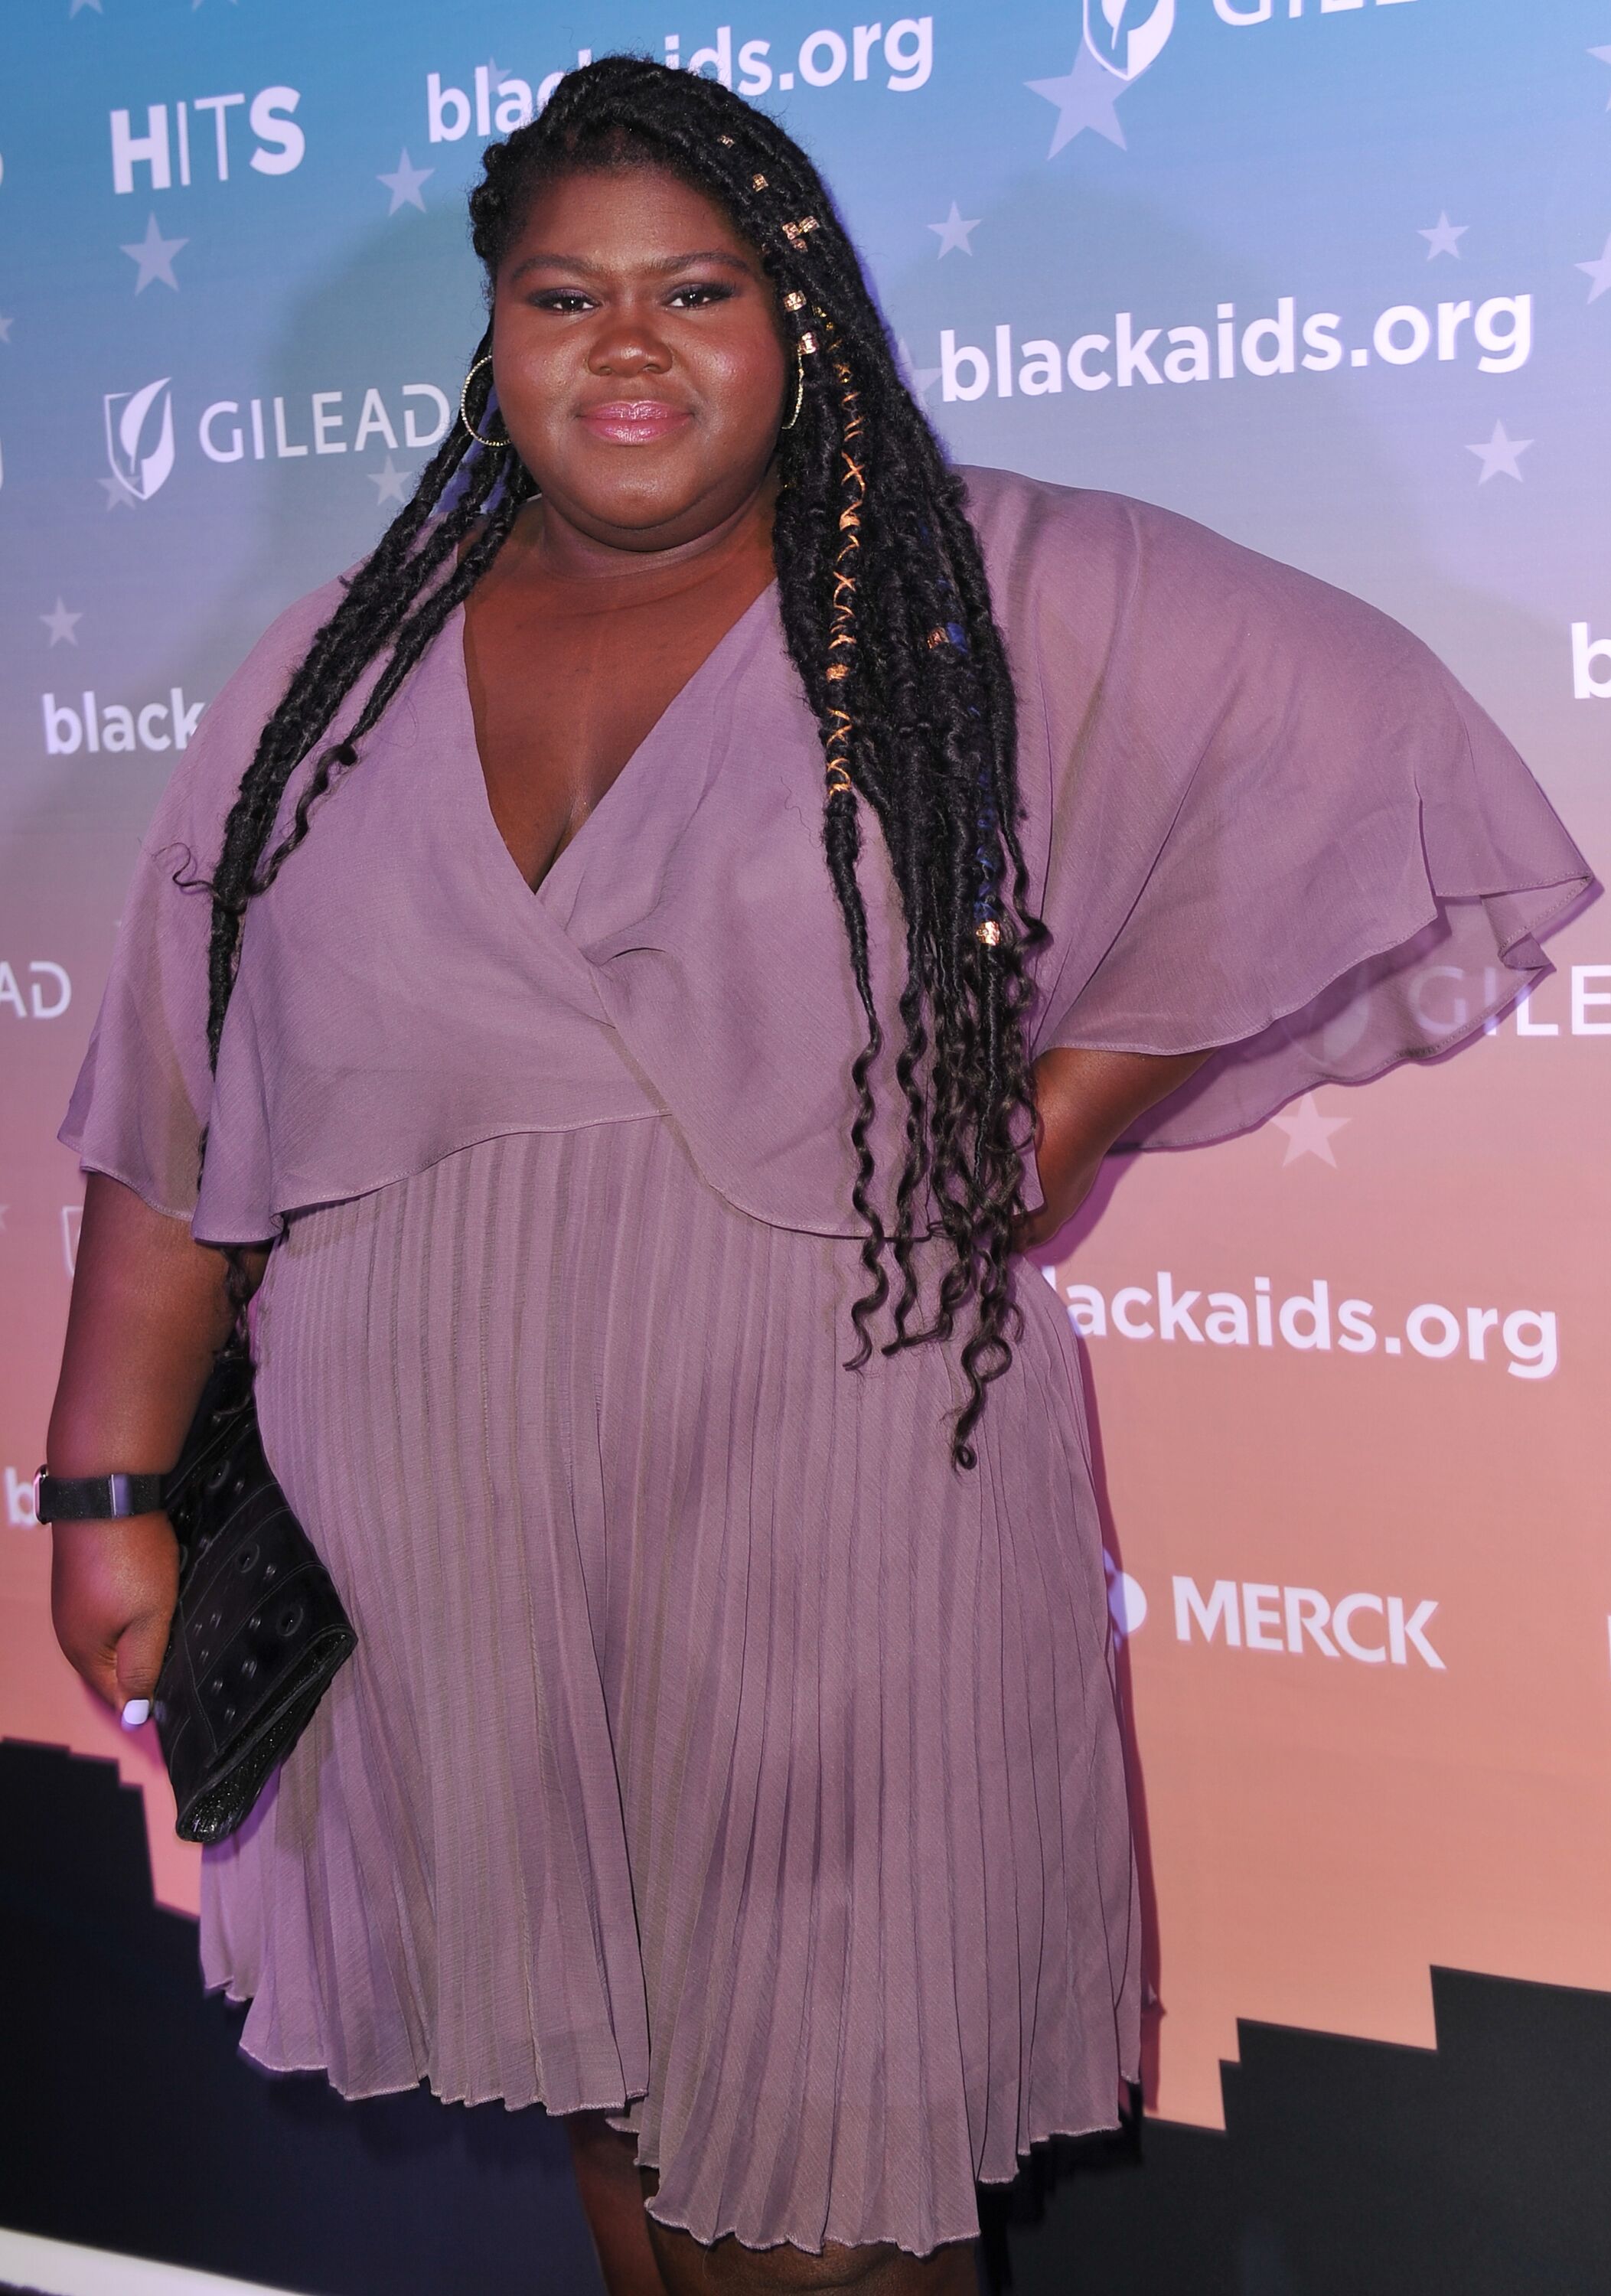 Gabourey Sidibe attends the Black AIDS Institute's 2018 Heroes in The Struggle Gala at California African American Museum on December 01, 2018 in Los Angeles, California. | Source: Getty Images